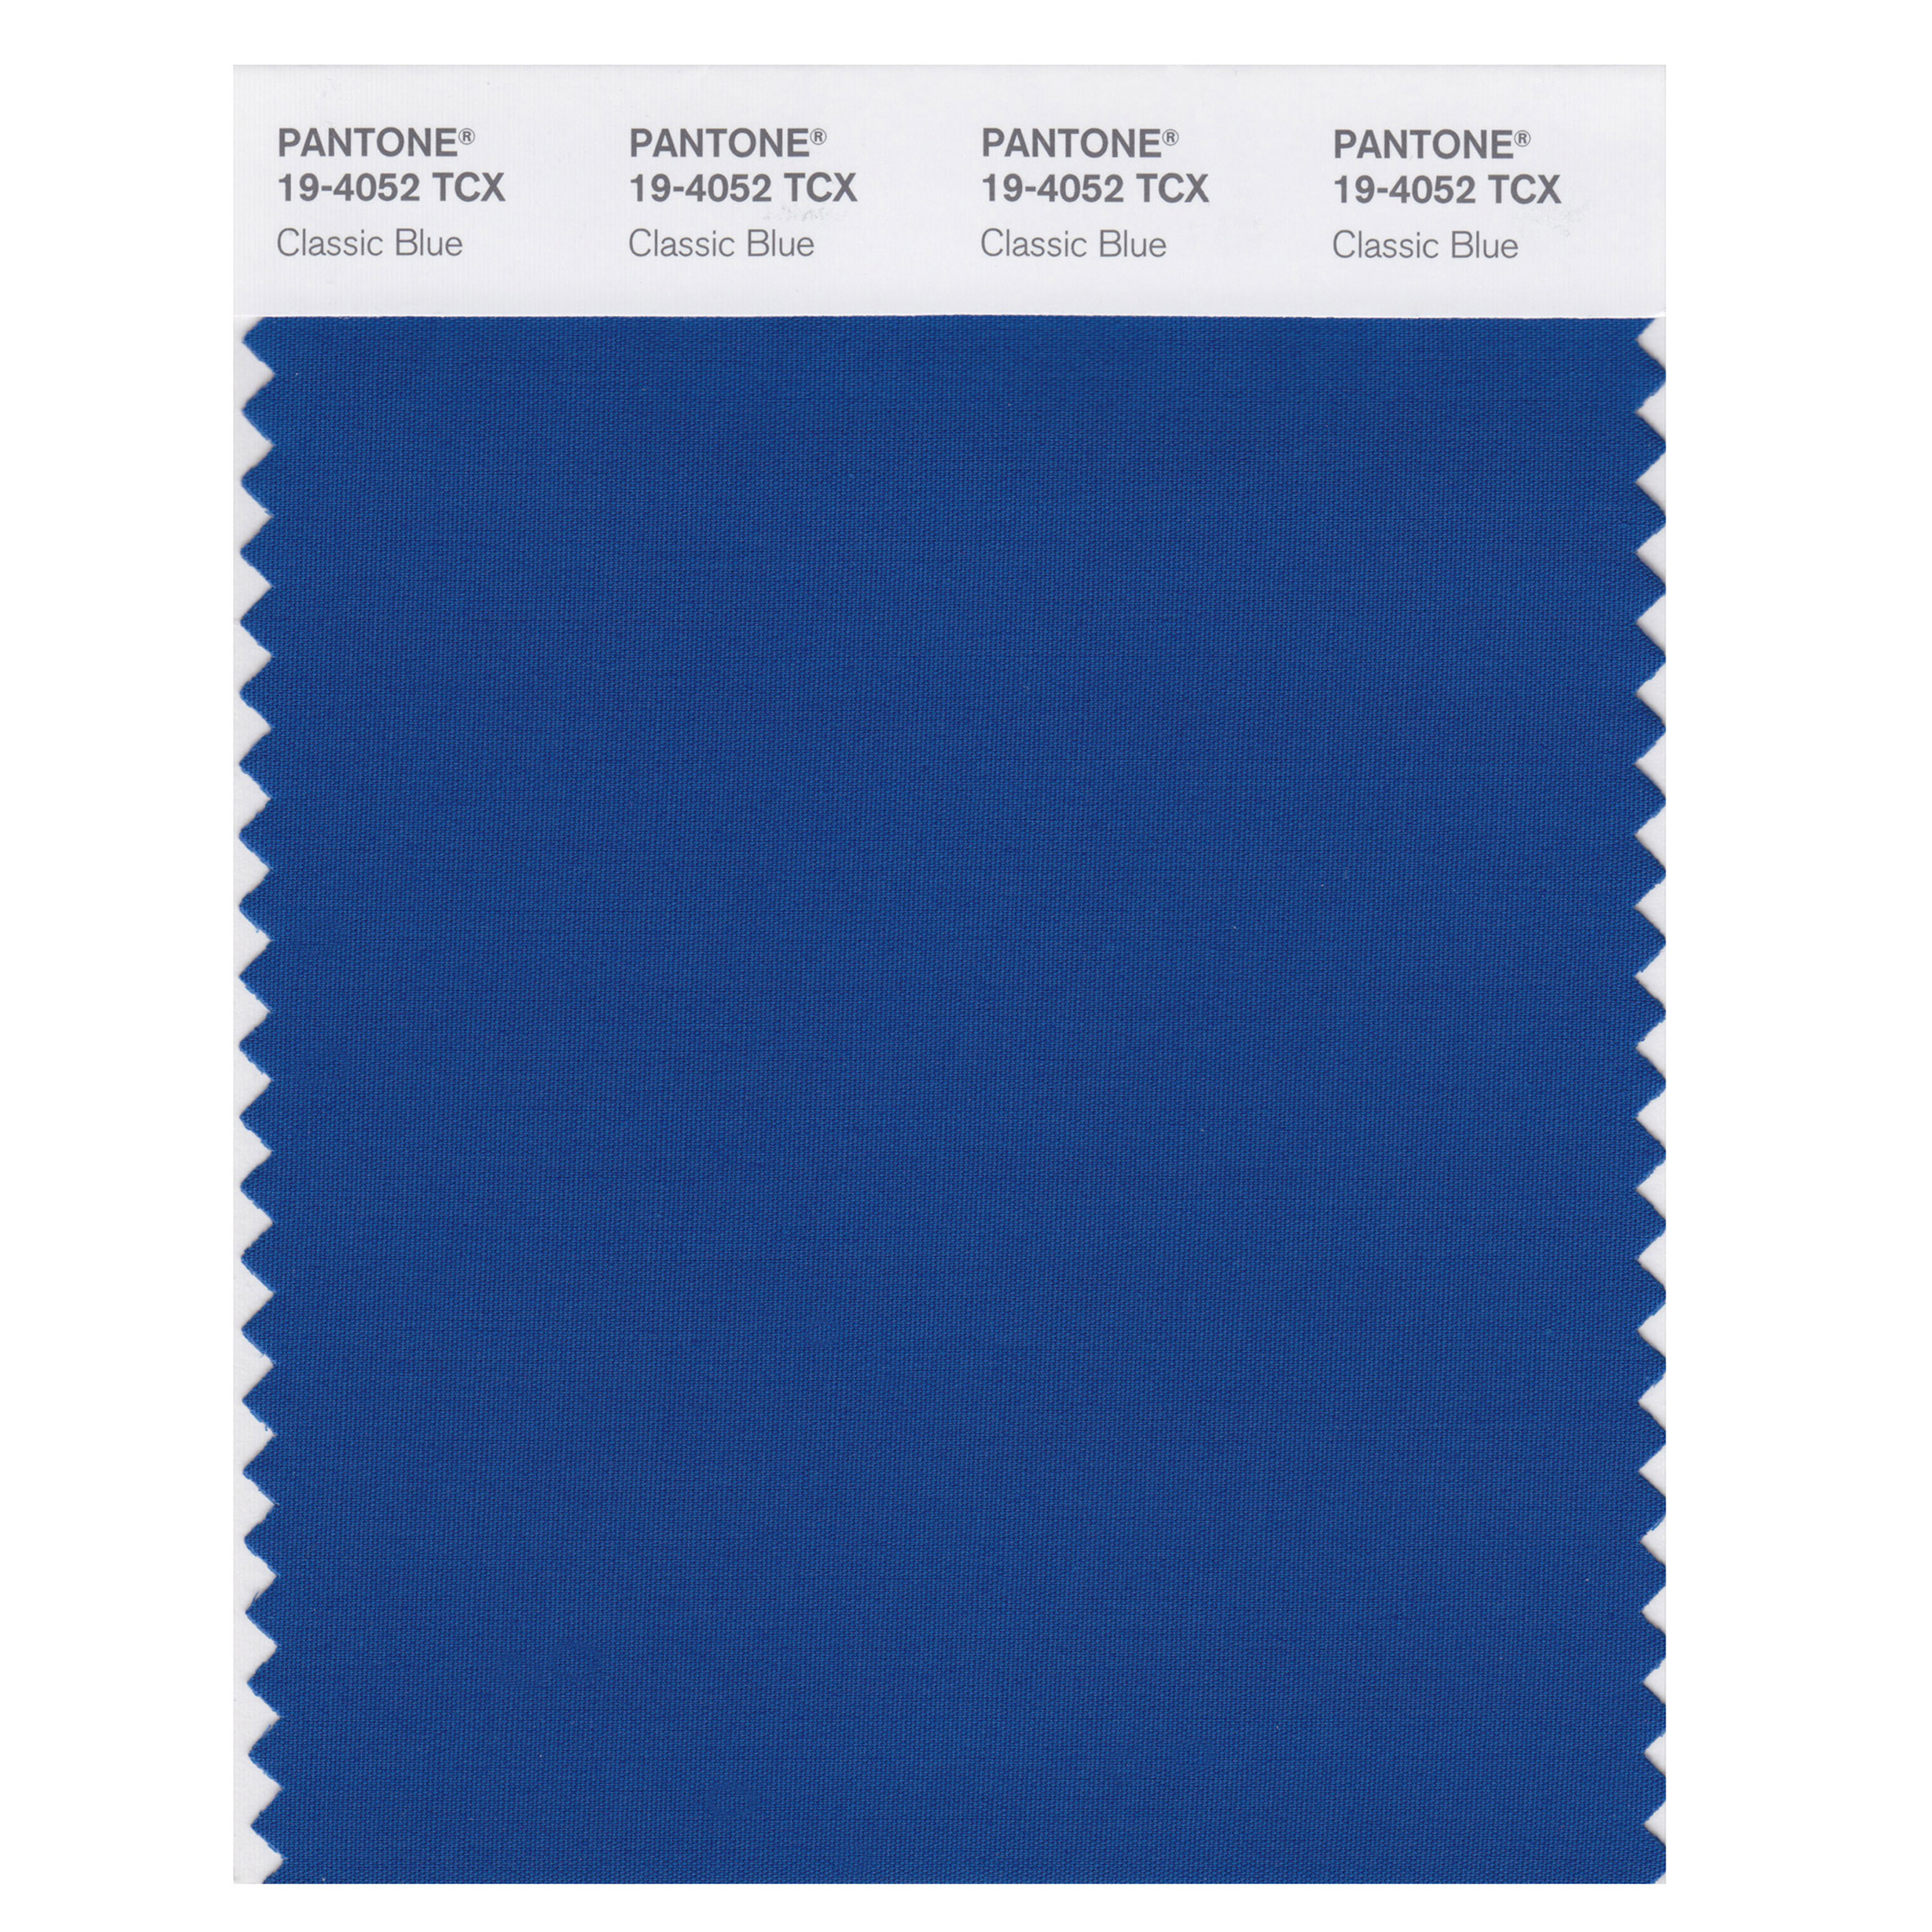 Pantone colour of the year 2020 is Classic Blue